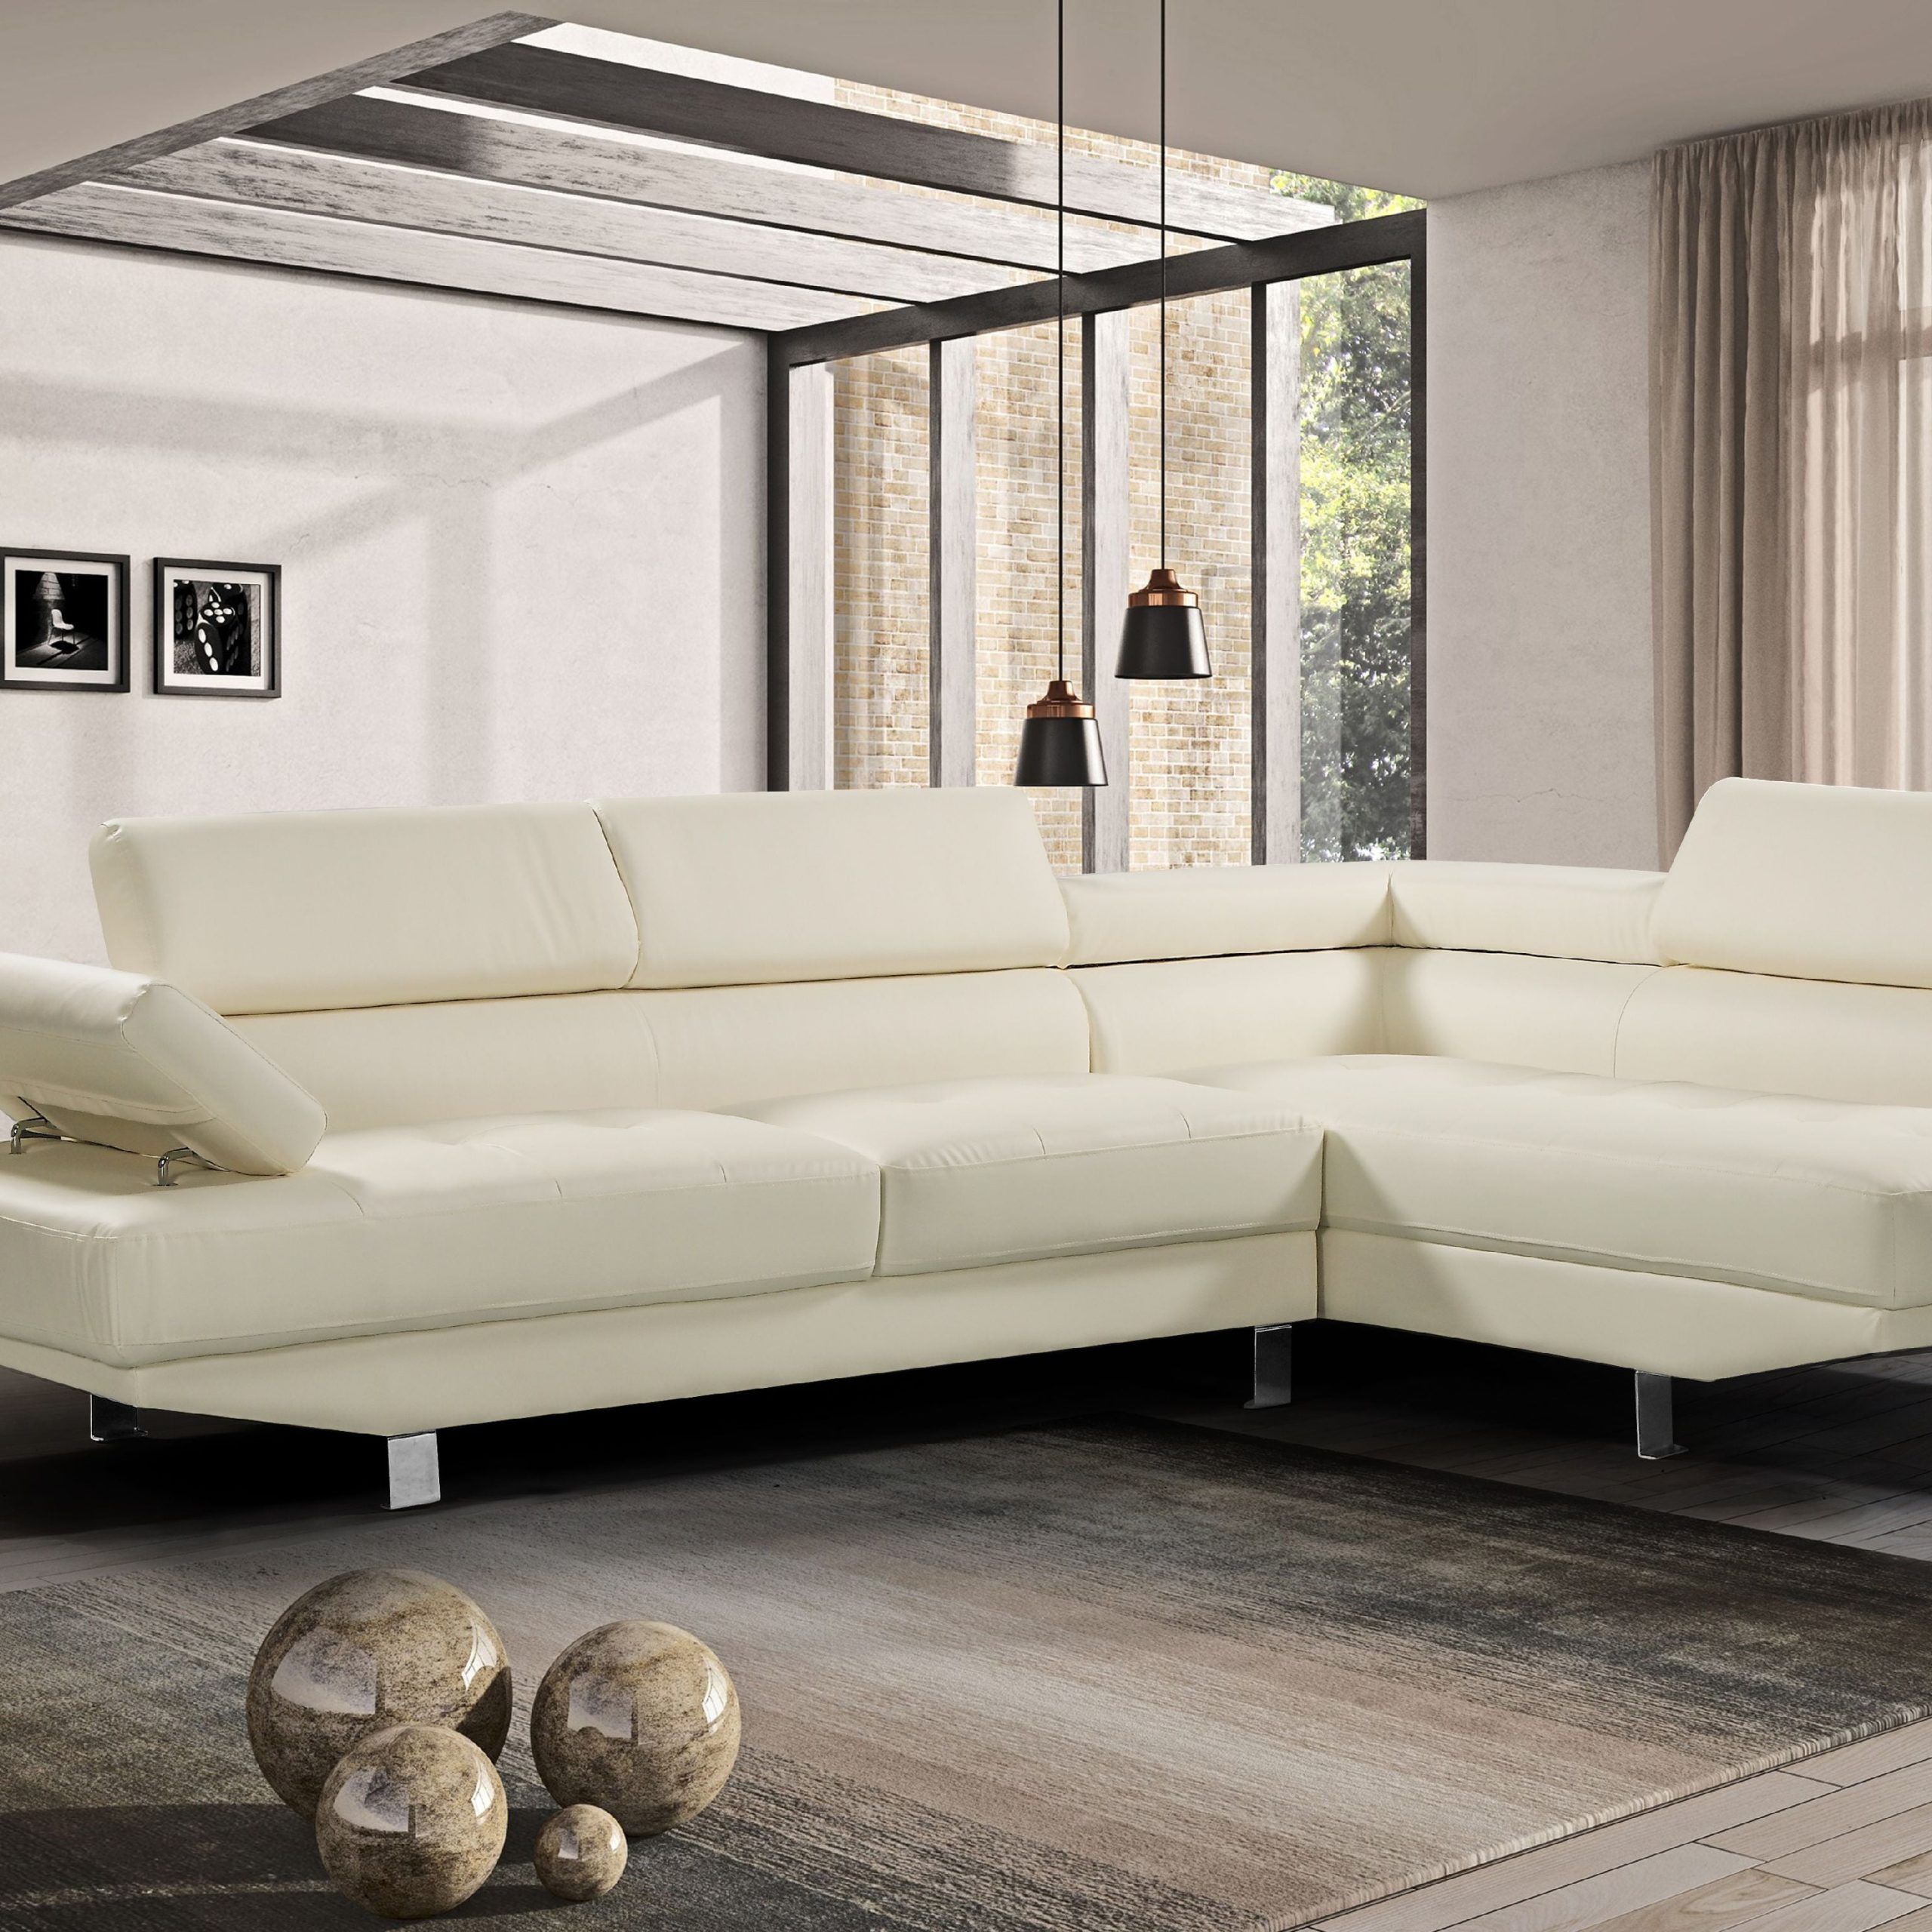 Harper&bright Designs Modern Faux Leather Sectional Sofa With Regarding Faux Leather Sofas (View 11 of 21)